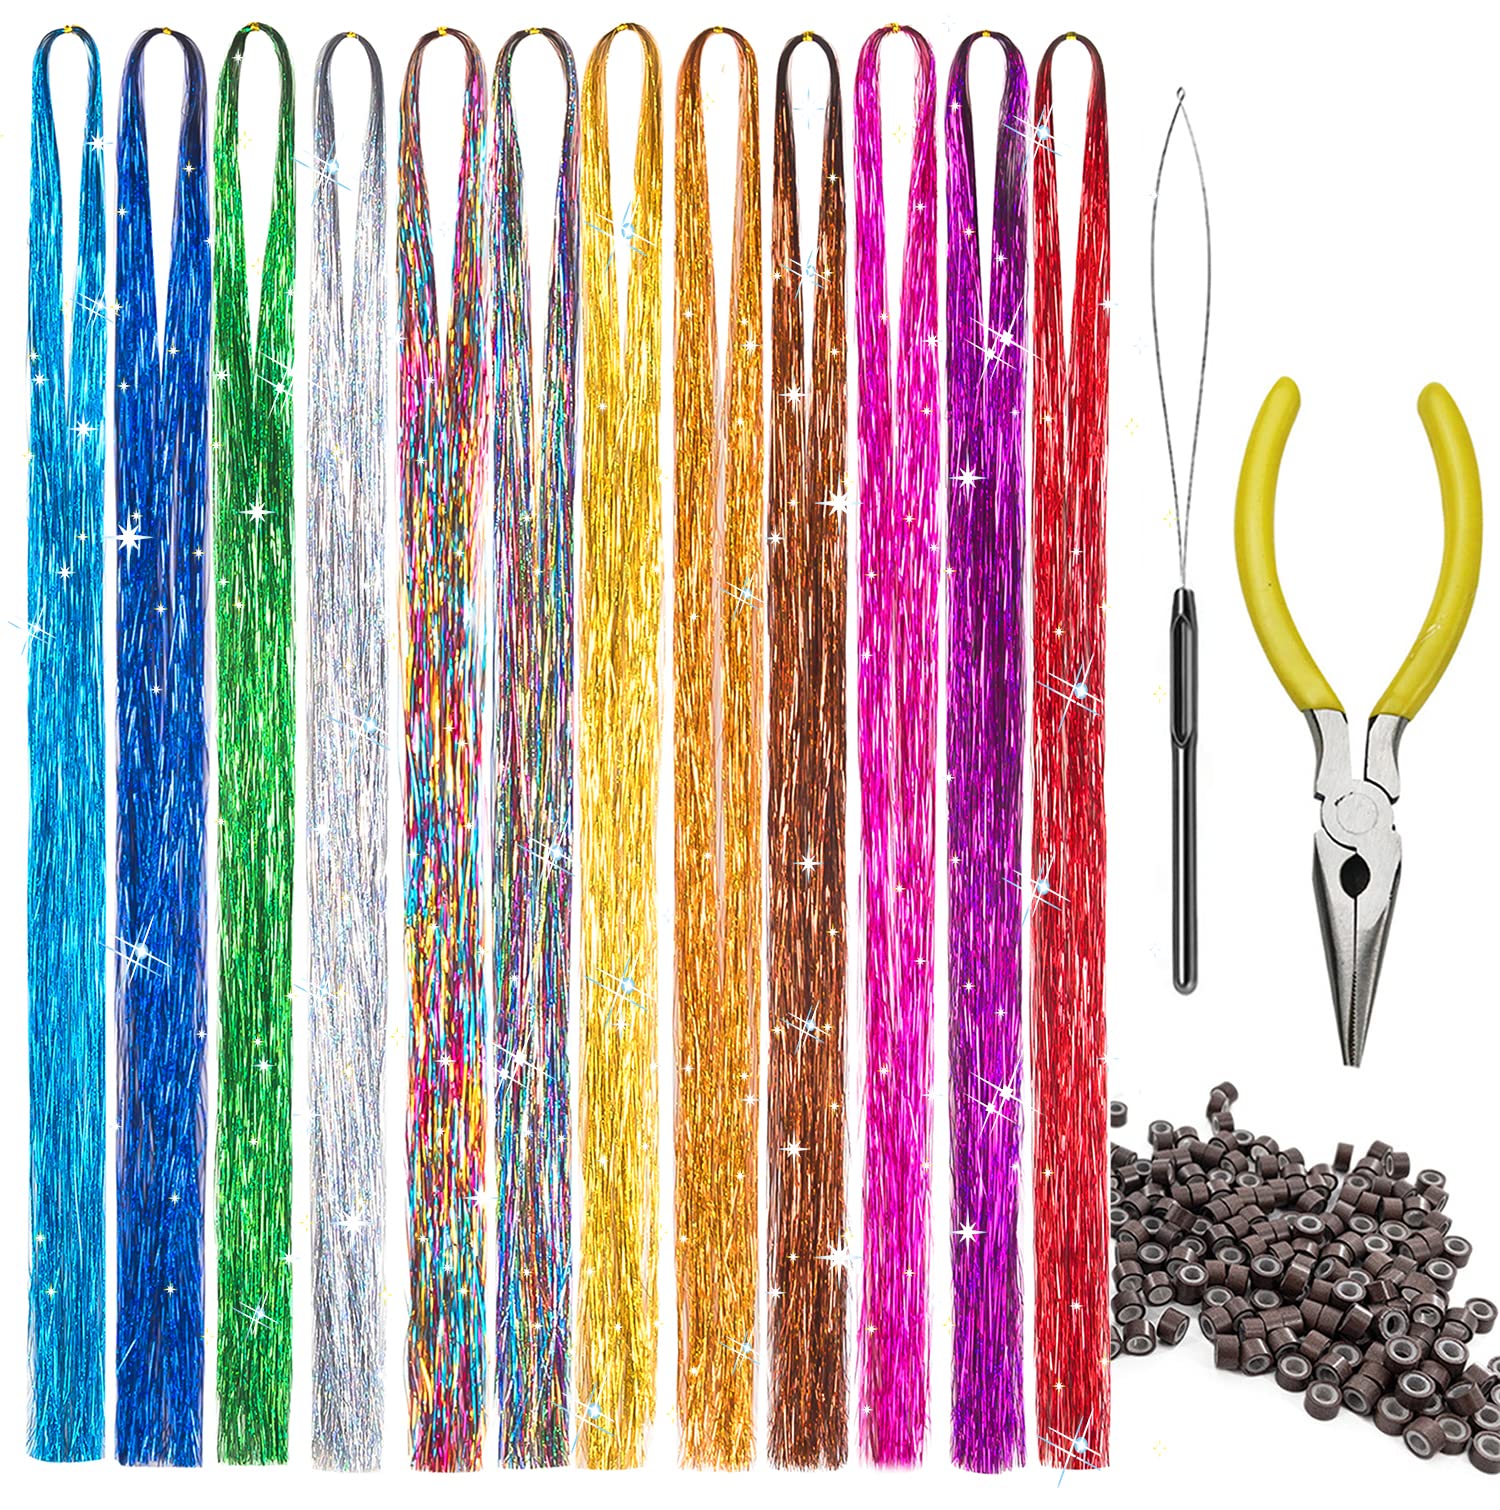 WILLBOND Hair tinsel strands kit 12 Colors 2400 Strands tinsel hair  extensions fairy hair tinsel kit for Women Girls With Tools 12 Colors+Dark  Brown Silicone Link Rings Beads